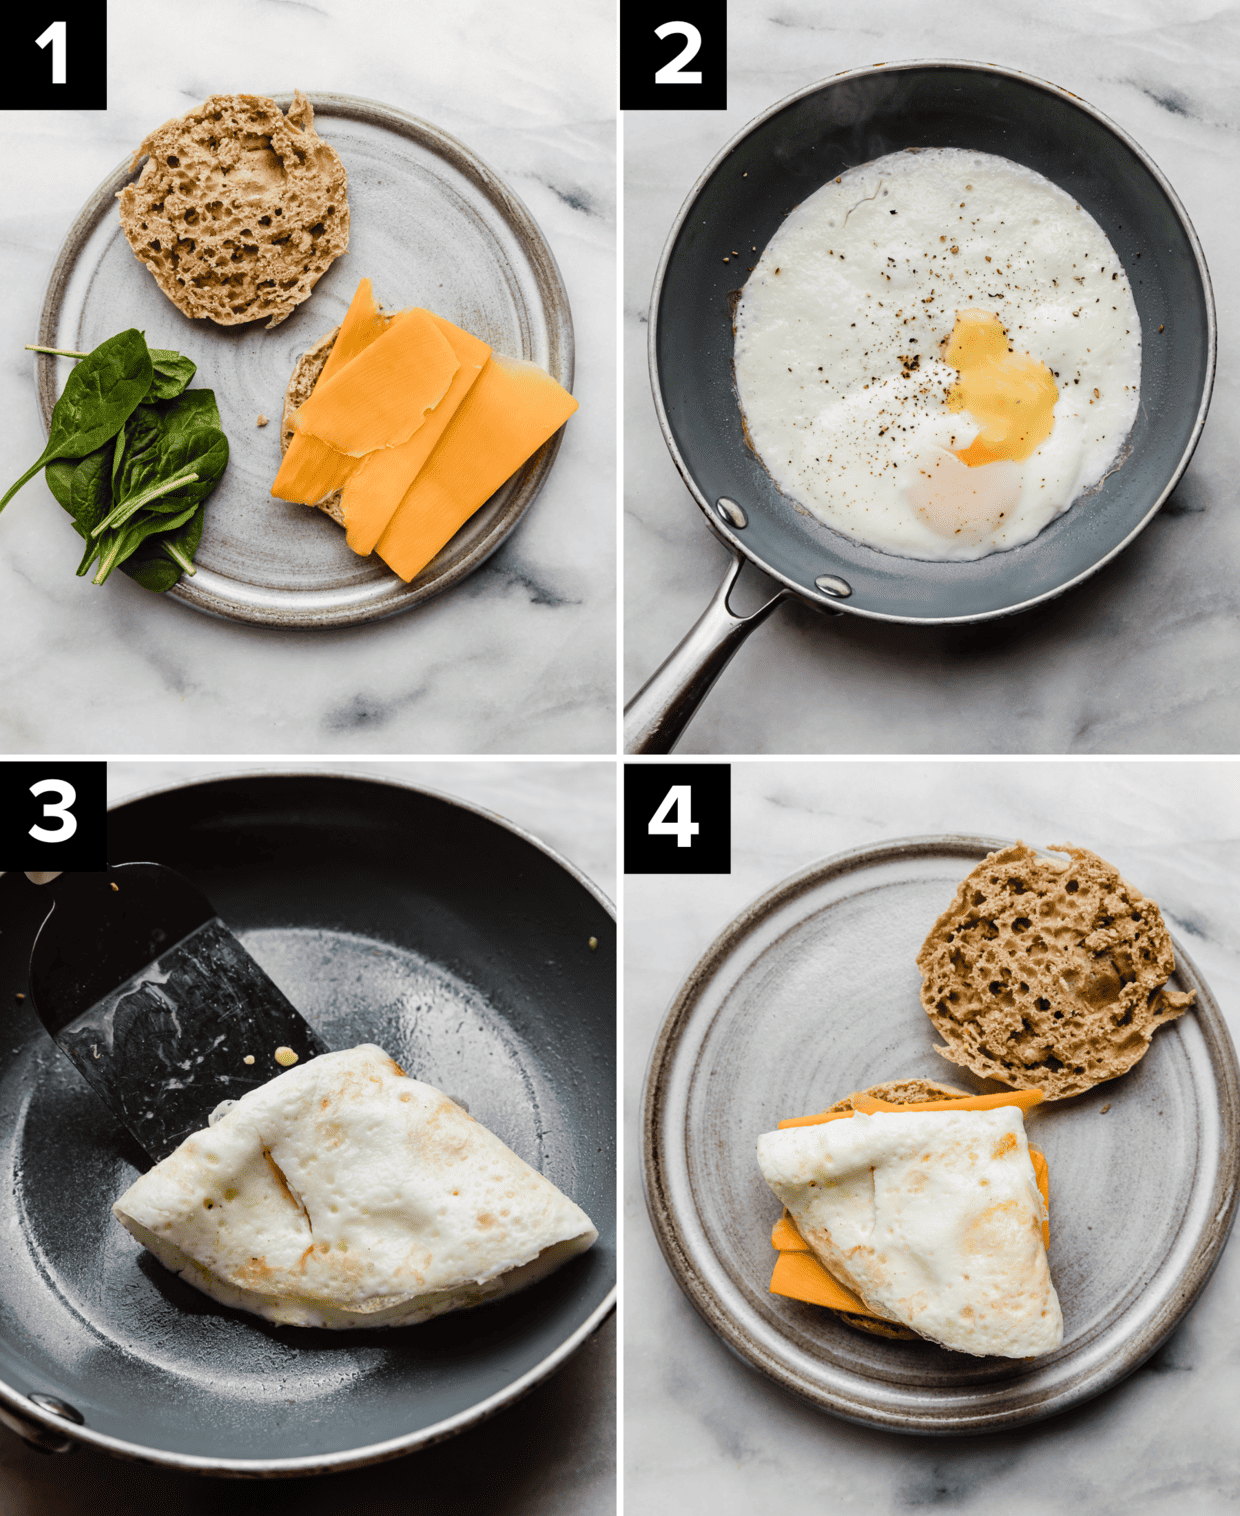 Four images showing how to make an easy and healthy Turkey Breakfast Sandwich recipe.